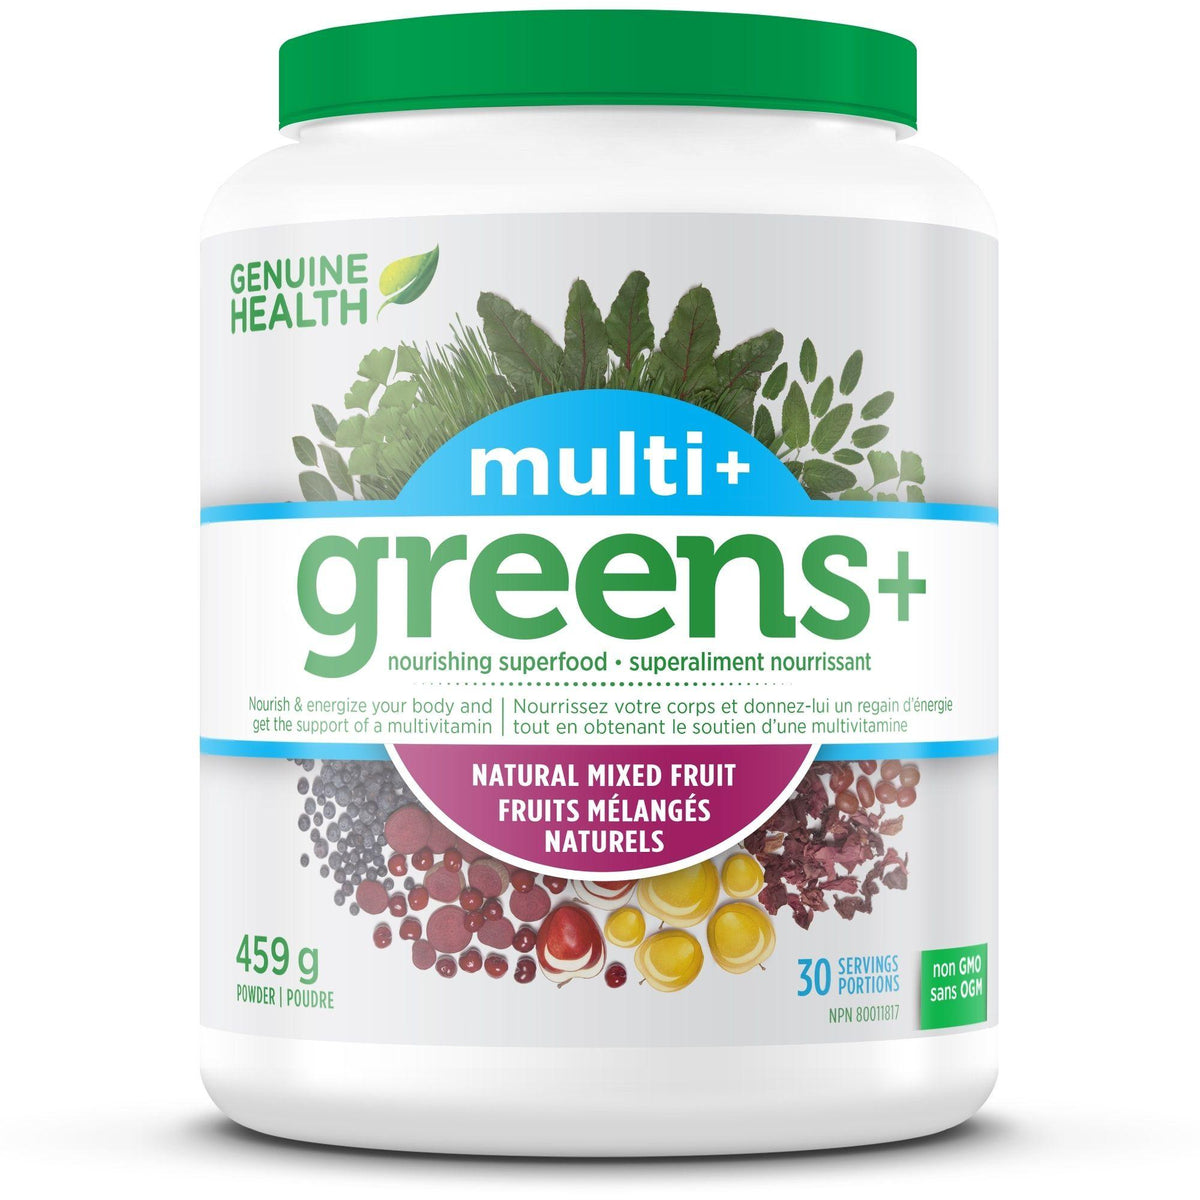 Genuine Health Greens+ Multi+ Mixed Fruit 459g Supplements - Greens at Village Vitamin Store